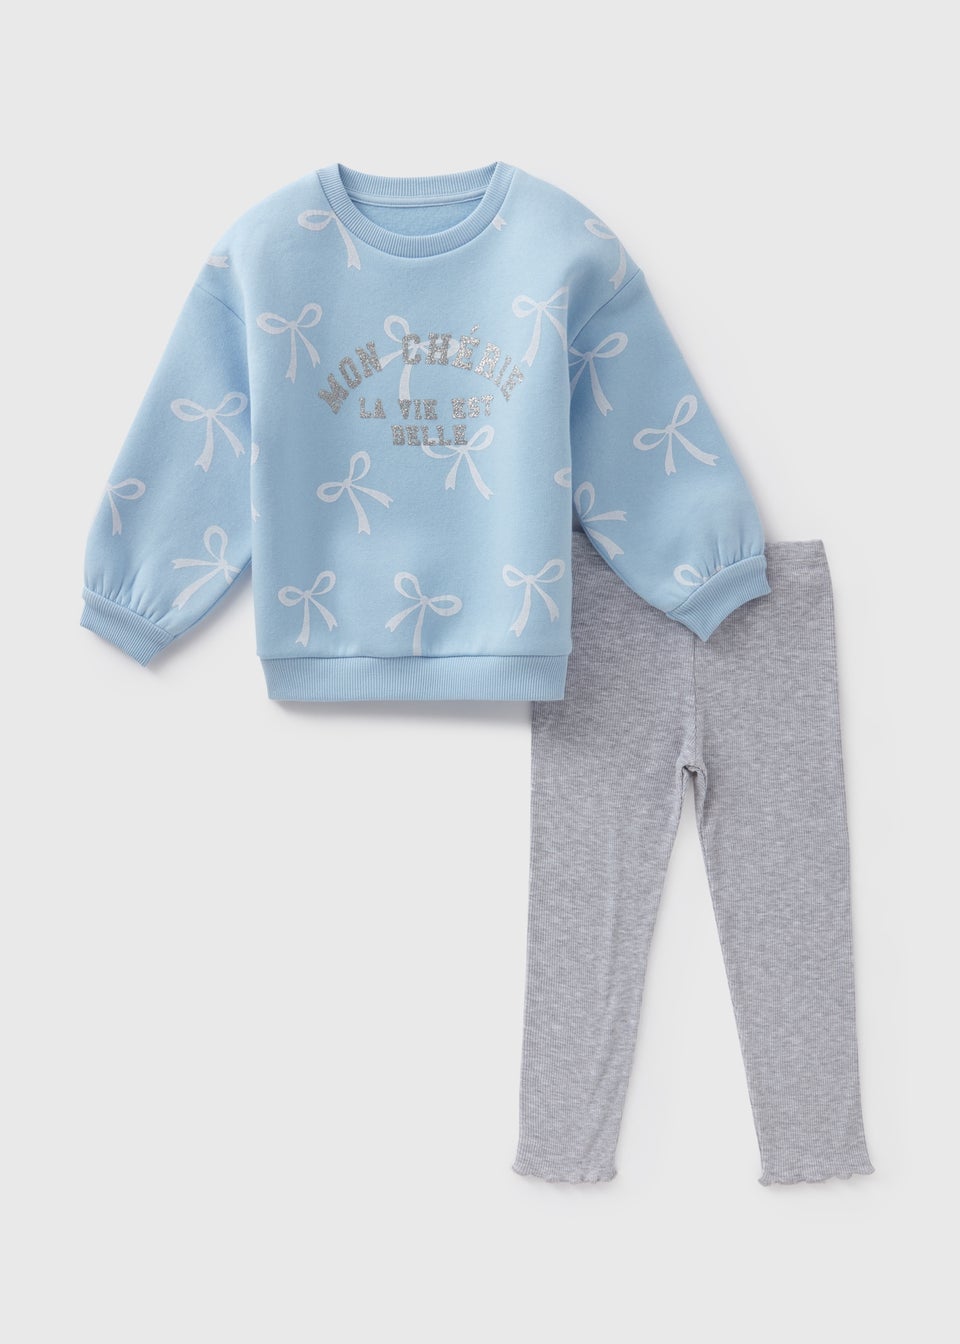 Girls Coral Crew Neck Jumper & Trousers Set